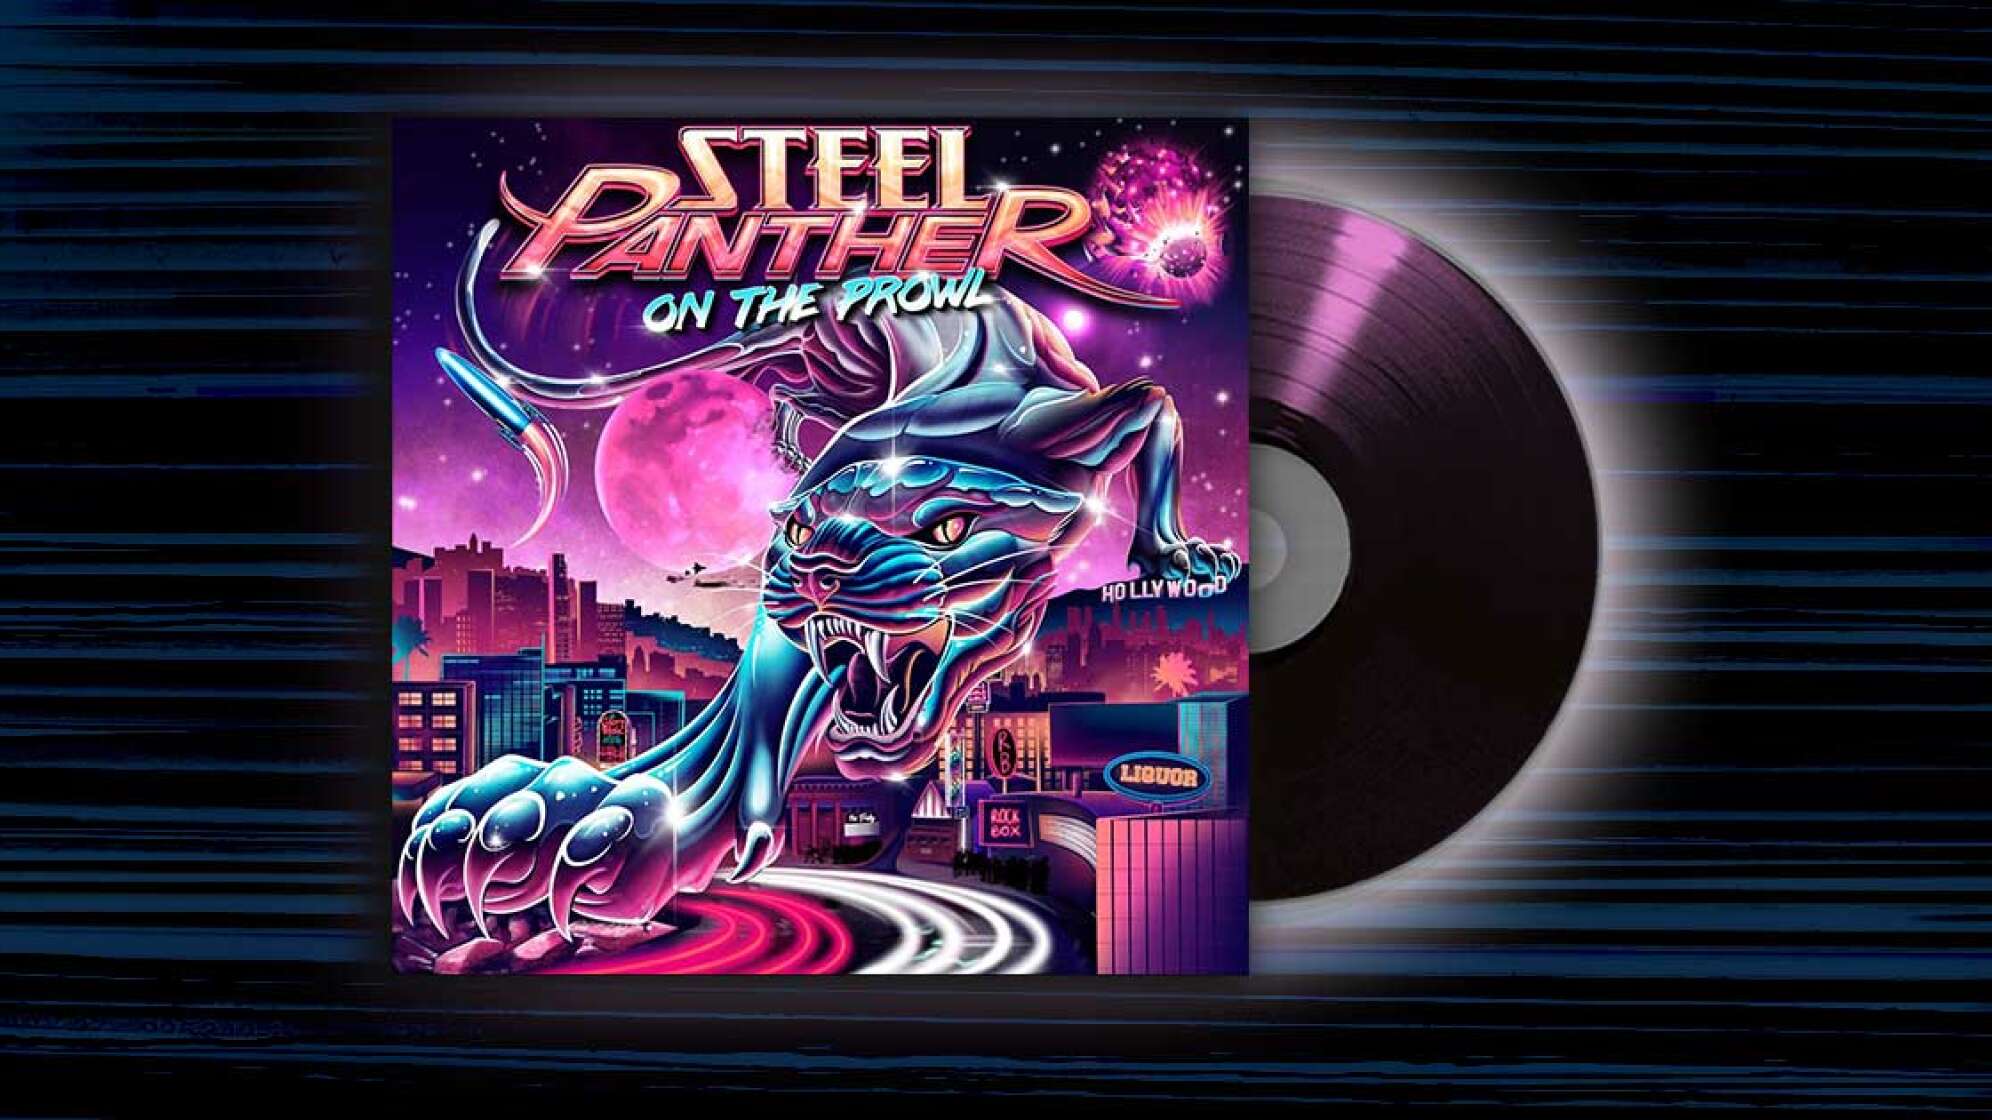 Albumcover vom Album: Steel Panther - On The Prowl